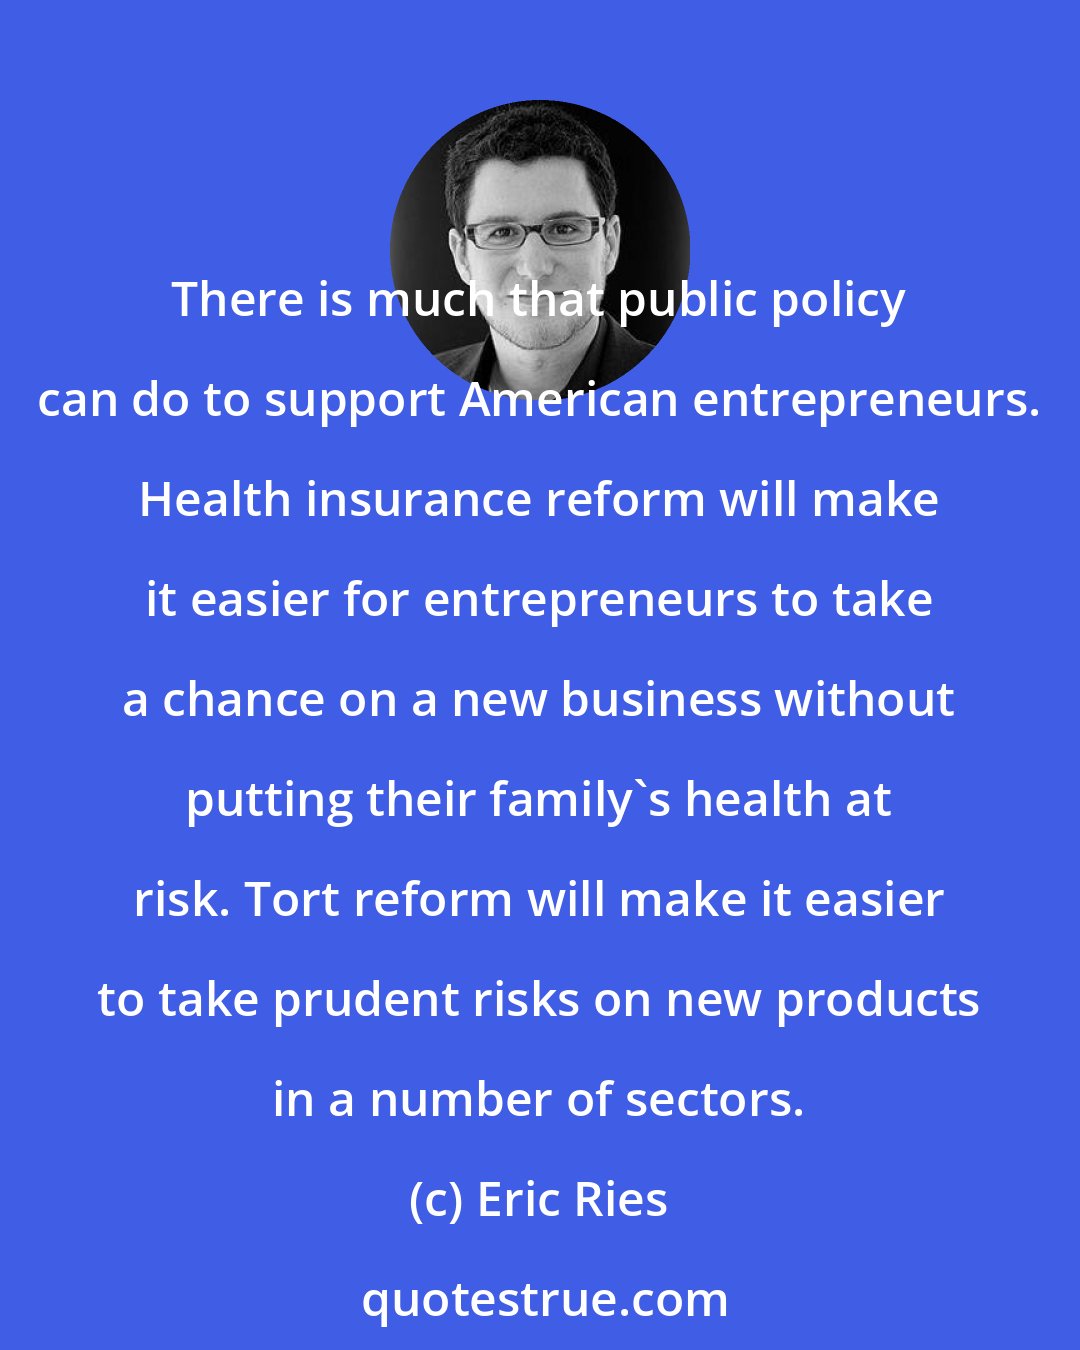 Eric Ries: There is much that public policy can do to support American entrepreneurs. Health insurance reform will make it easier for entrepreneurs to take a chance on a new business without putting their family's health at risk. Tort reform will make it easier to take prudent risks on new products in a number of sectors.